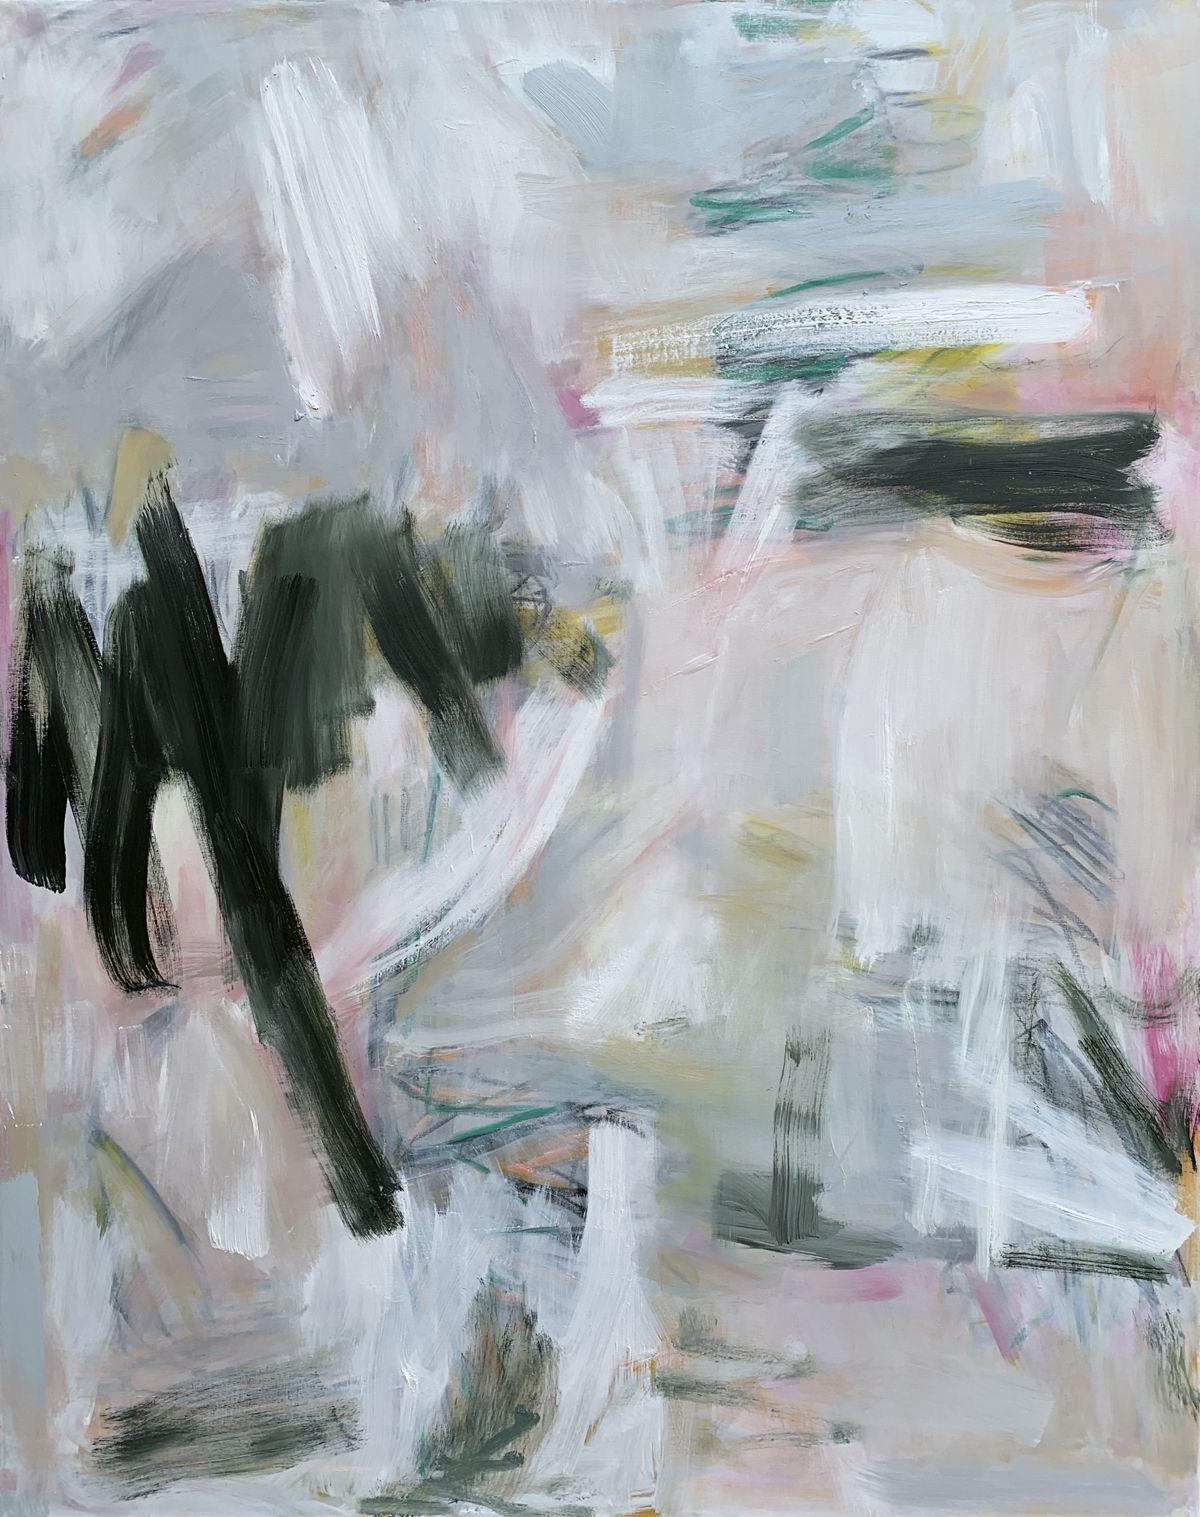 Life Line, Painting, Oil on Canvas - Gray Abstract Painting by Trixie Pitts